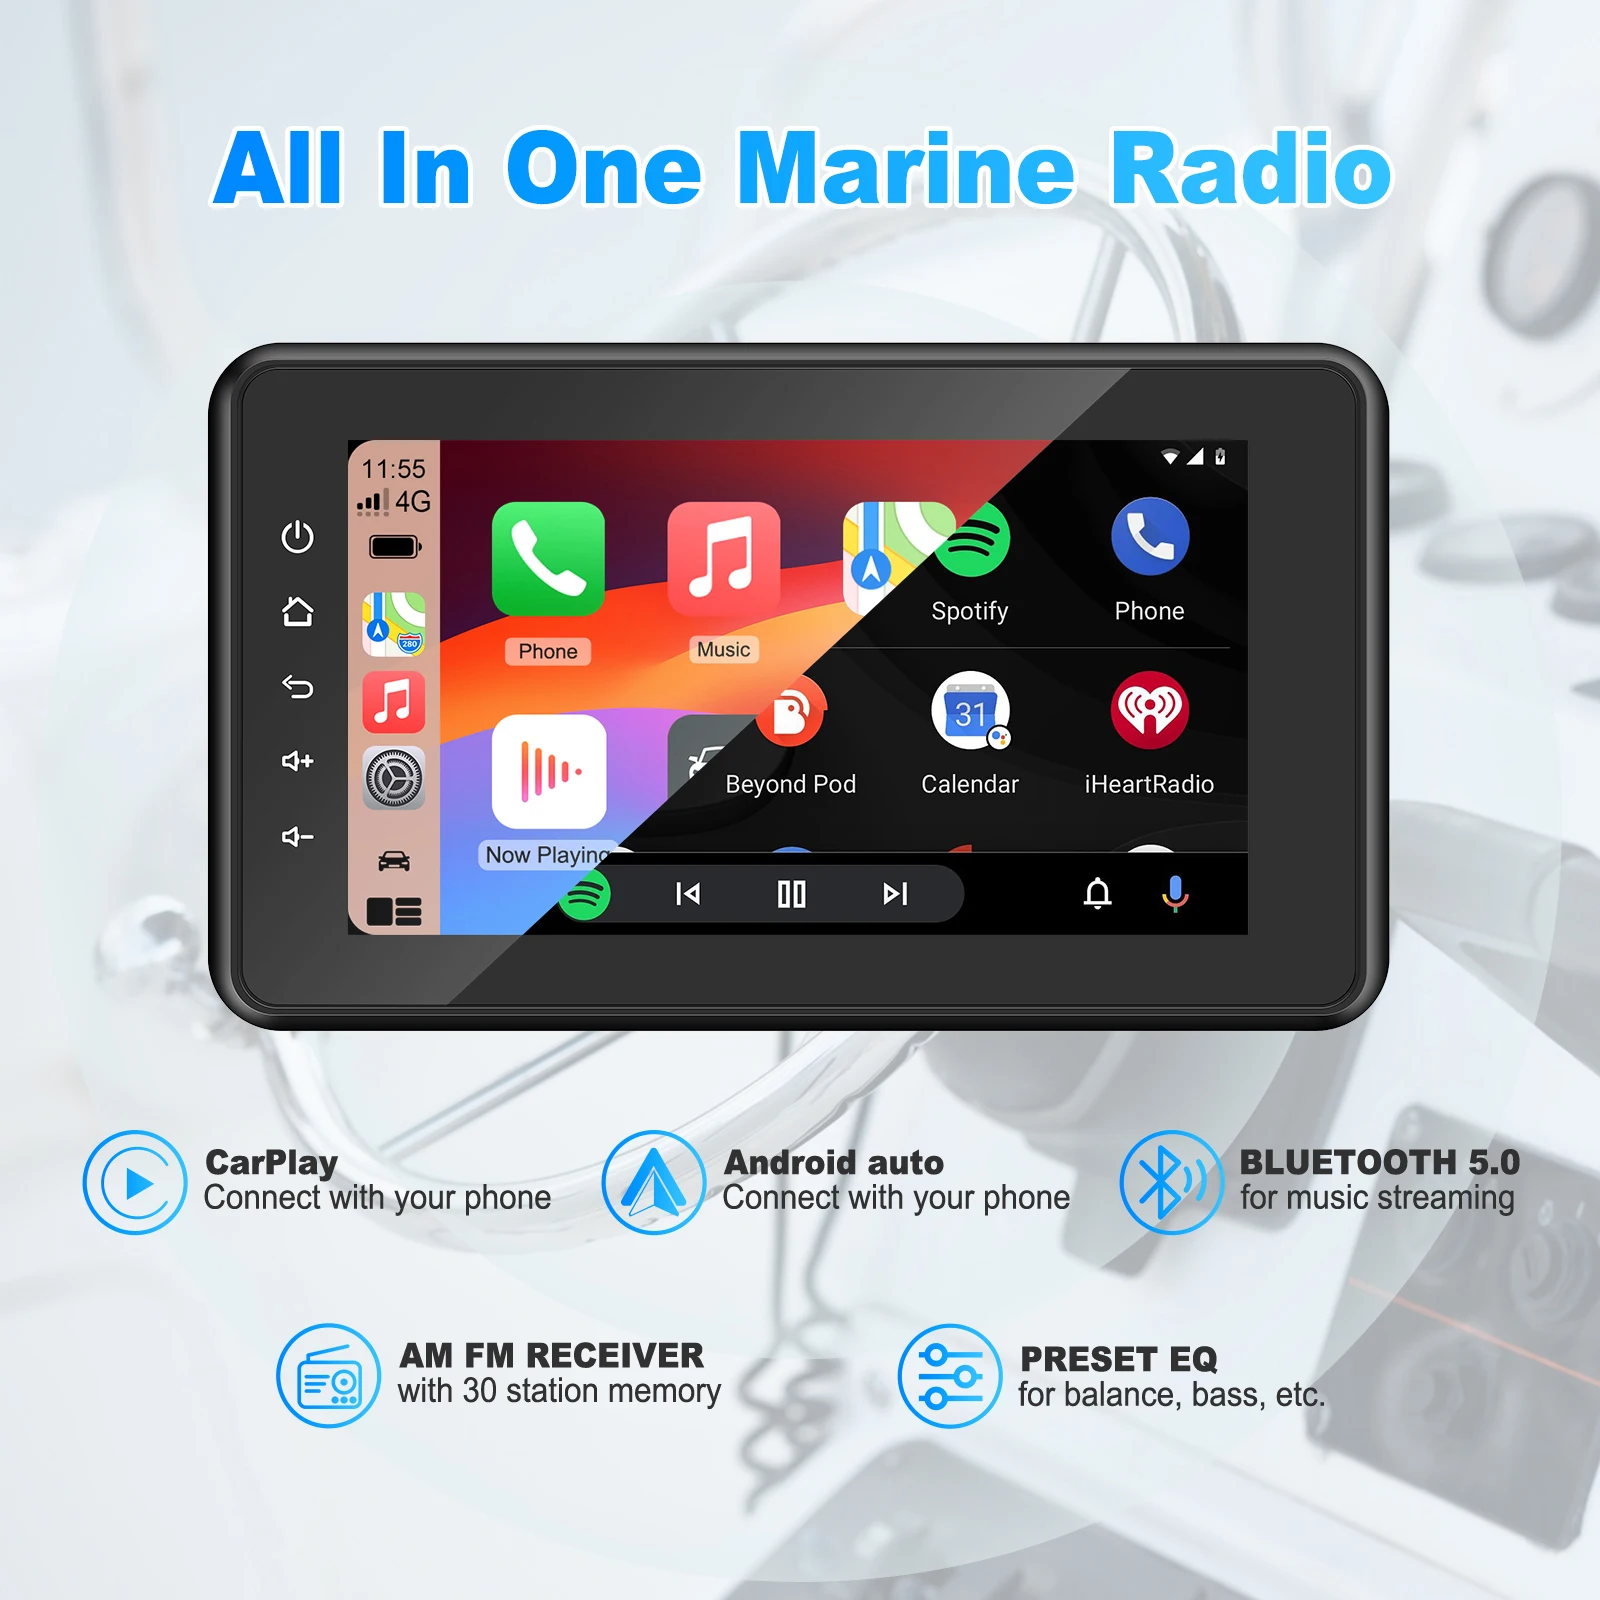 

8inch 2Din Marine Use Multimedia Player Wireless CarPlay Android Auto Display Ipx6 Waterproof for Marine ATV Boat Golf Cart